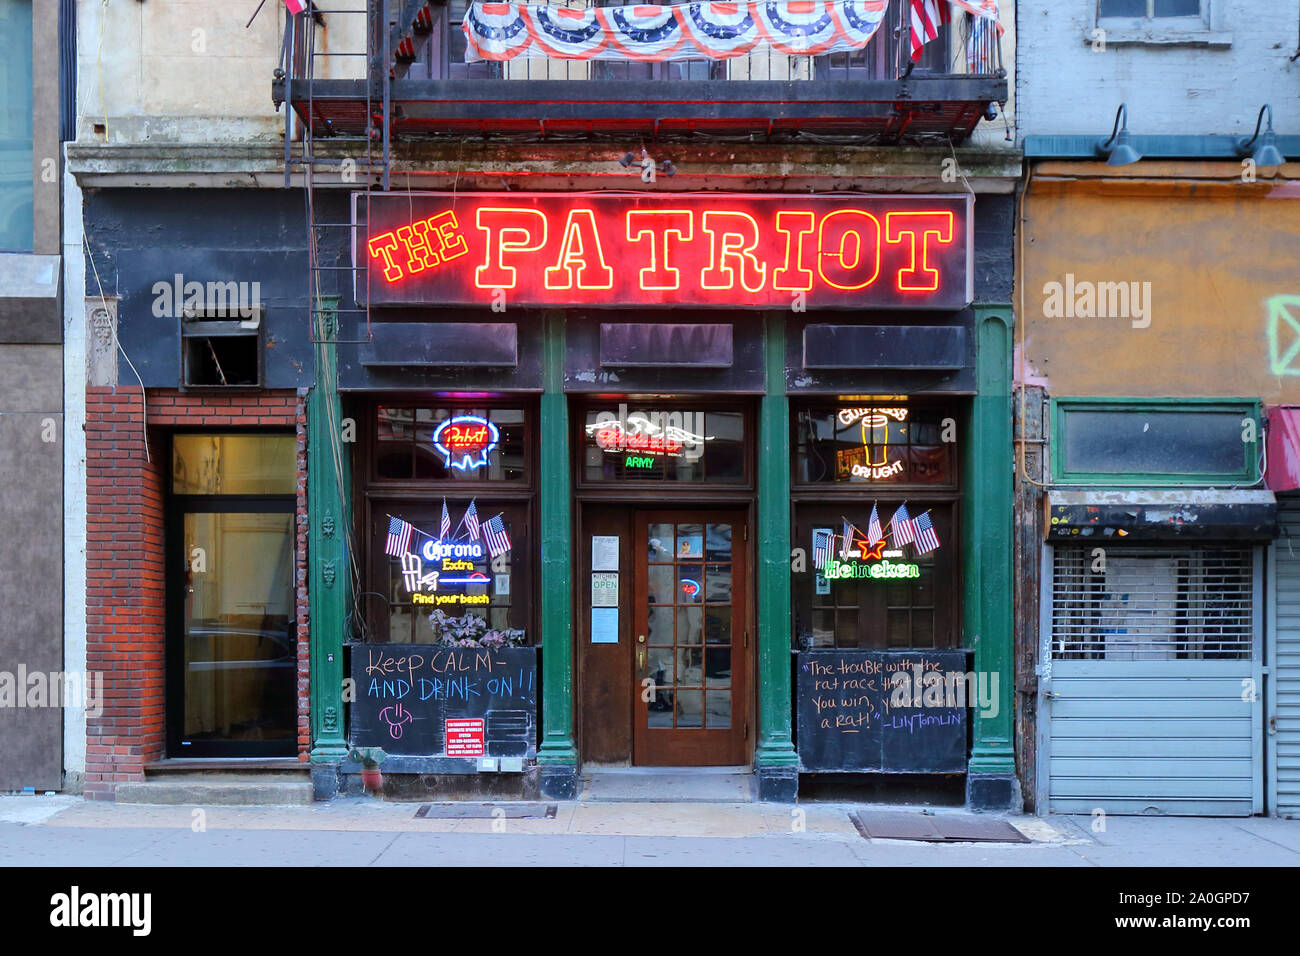 [historical storefront] Patriot Saloon, 110 Chambers Street, New York, NY. exterior storefront of a bar in Manhattan's financial district. Stock Photo